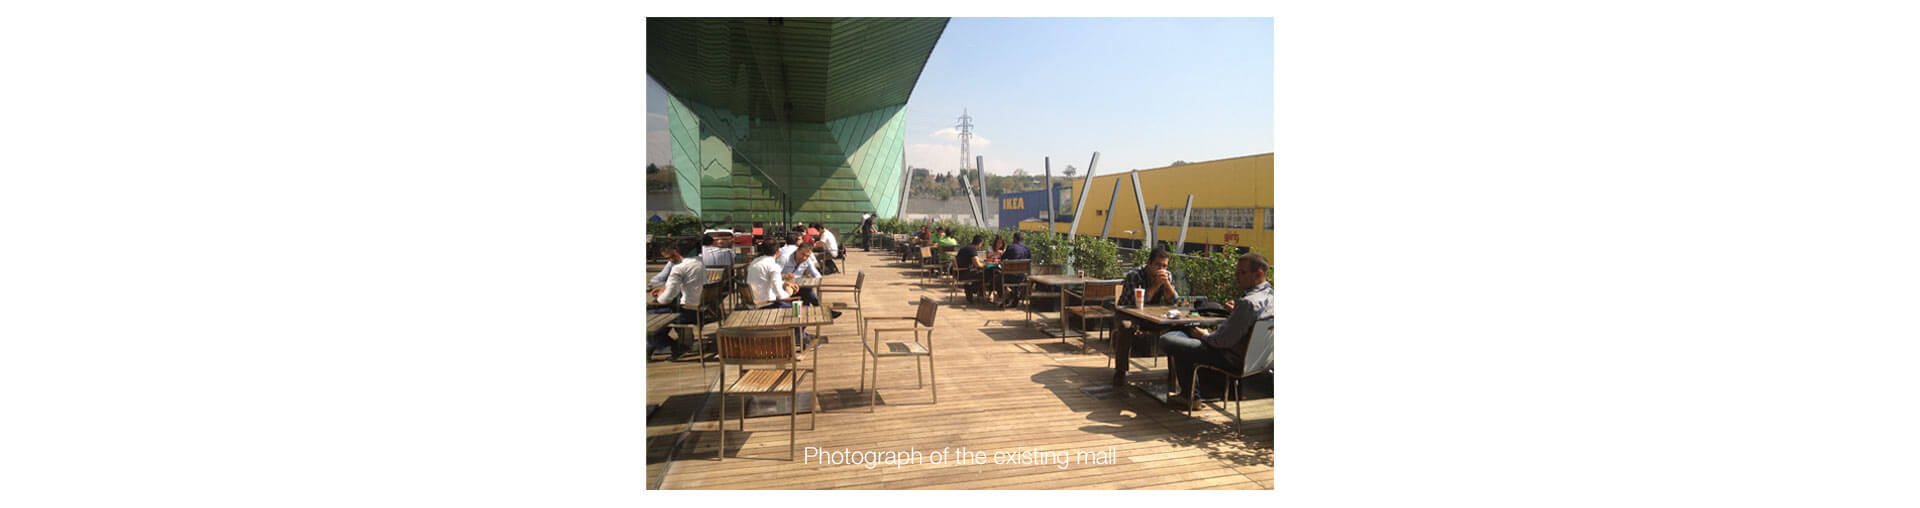 Forum Istanbul Turkey shopping mall existing food court terrace design